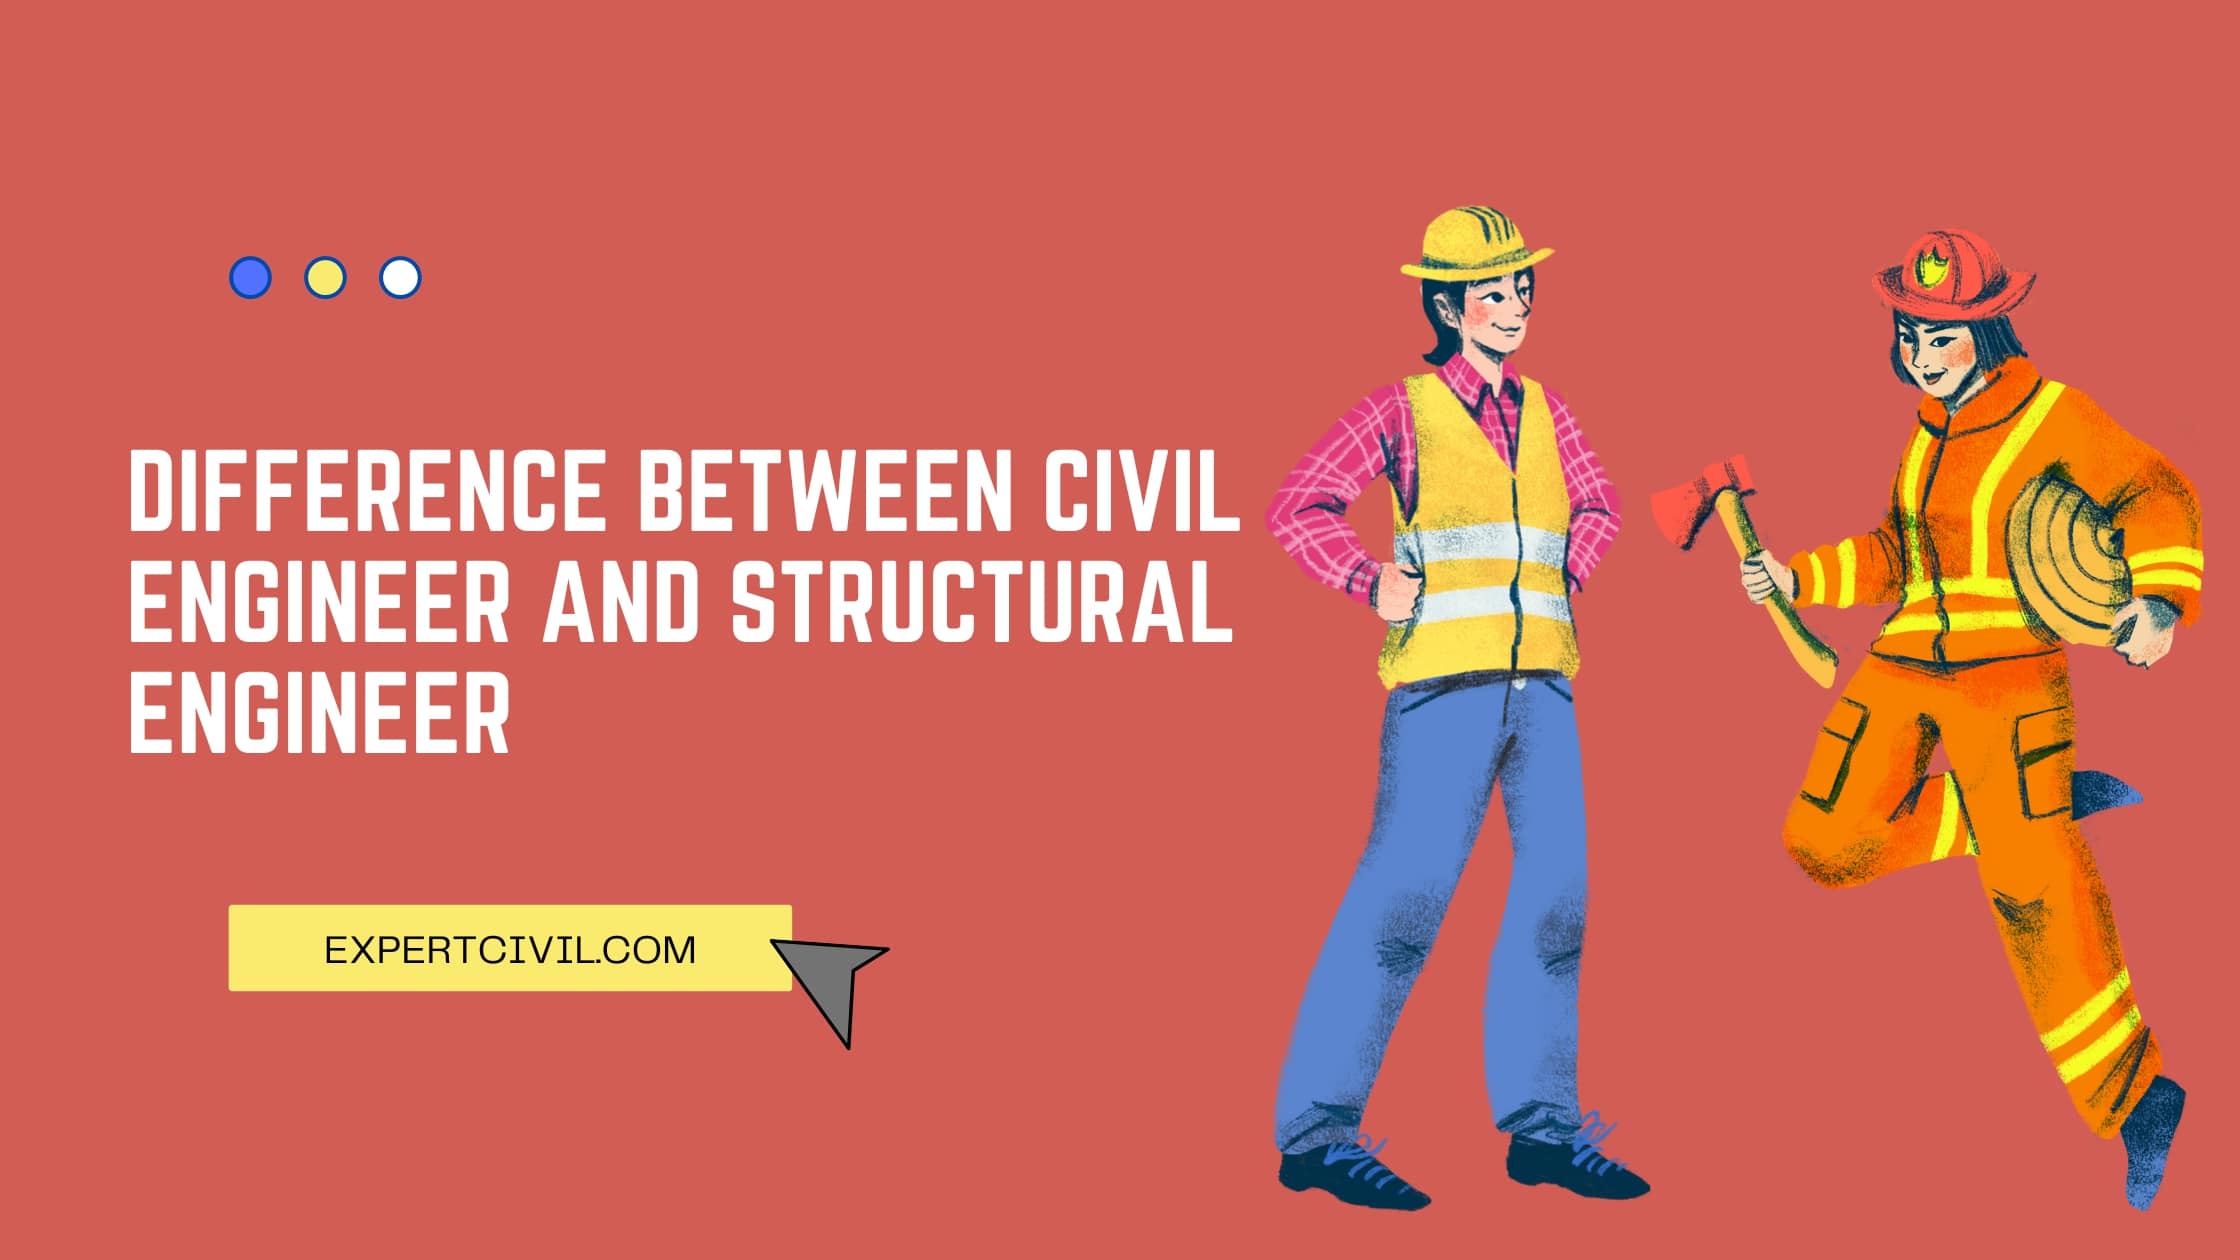 Difference Between Civil Engineer and Structural Engineer